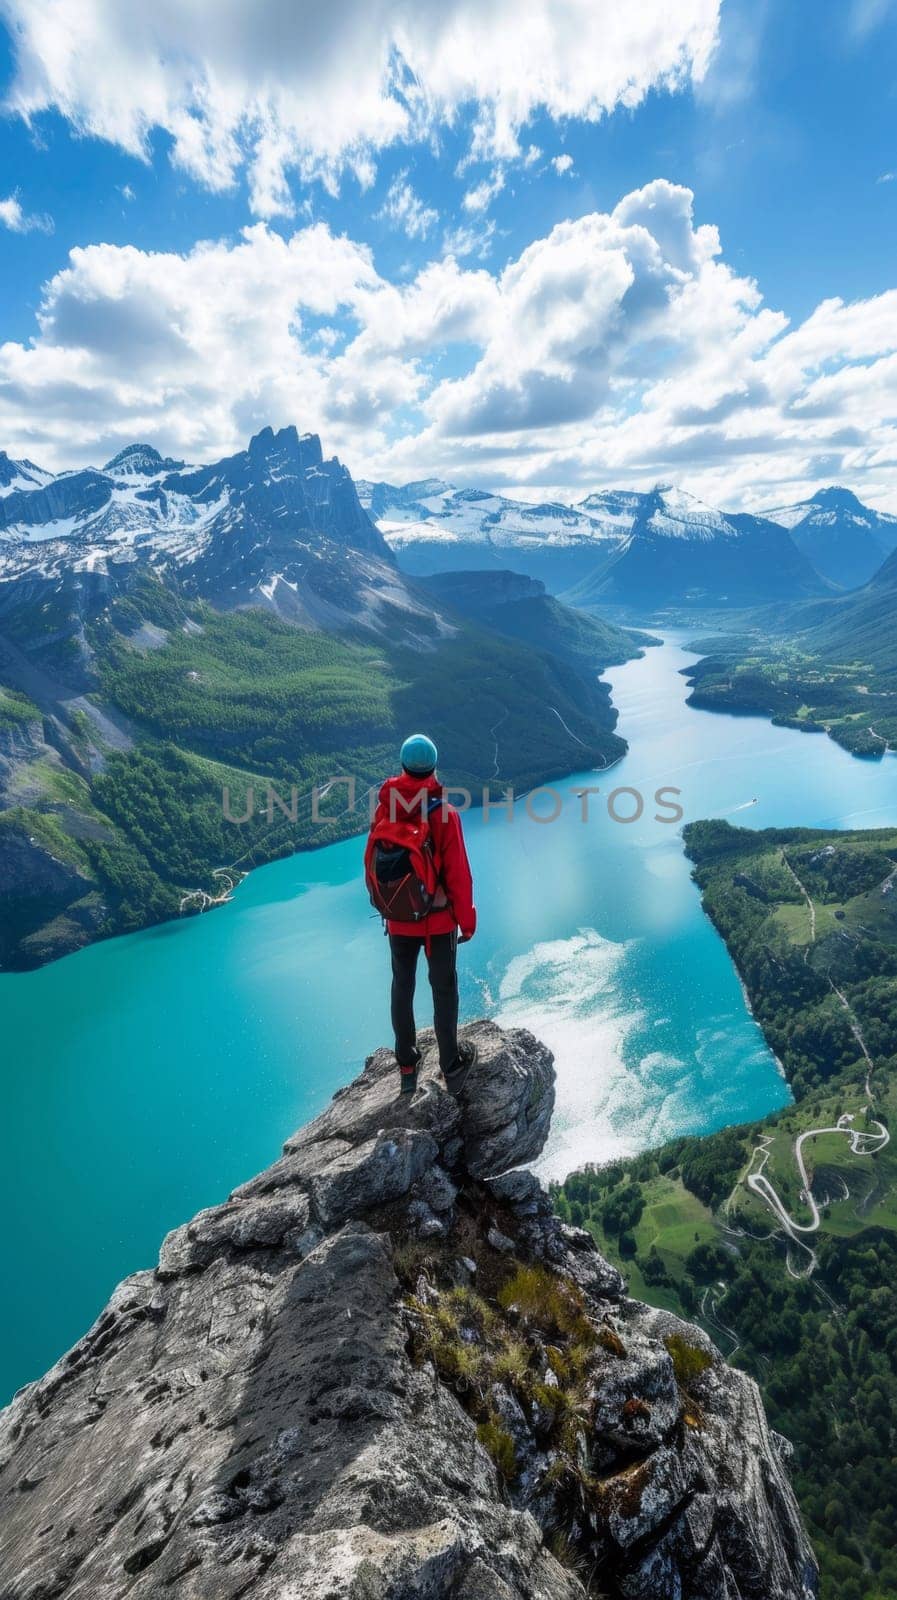 A man standing on top of a cliff overlooking water and mountains, AI by starush